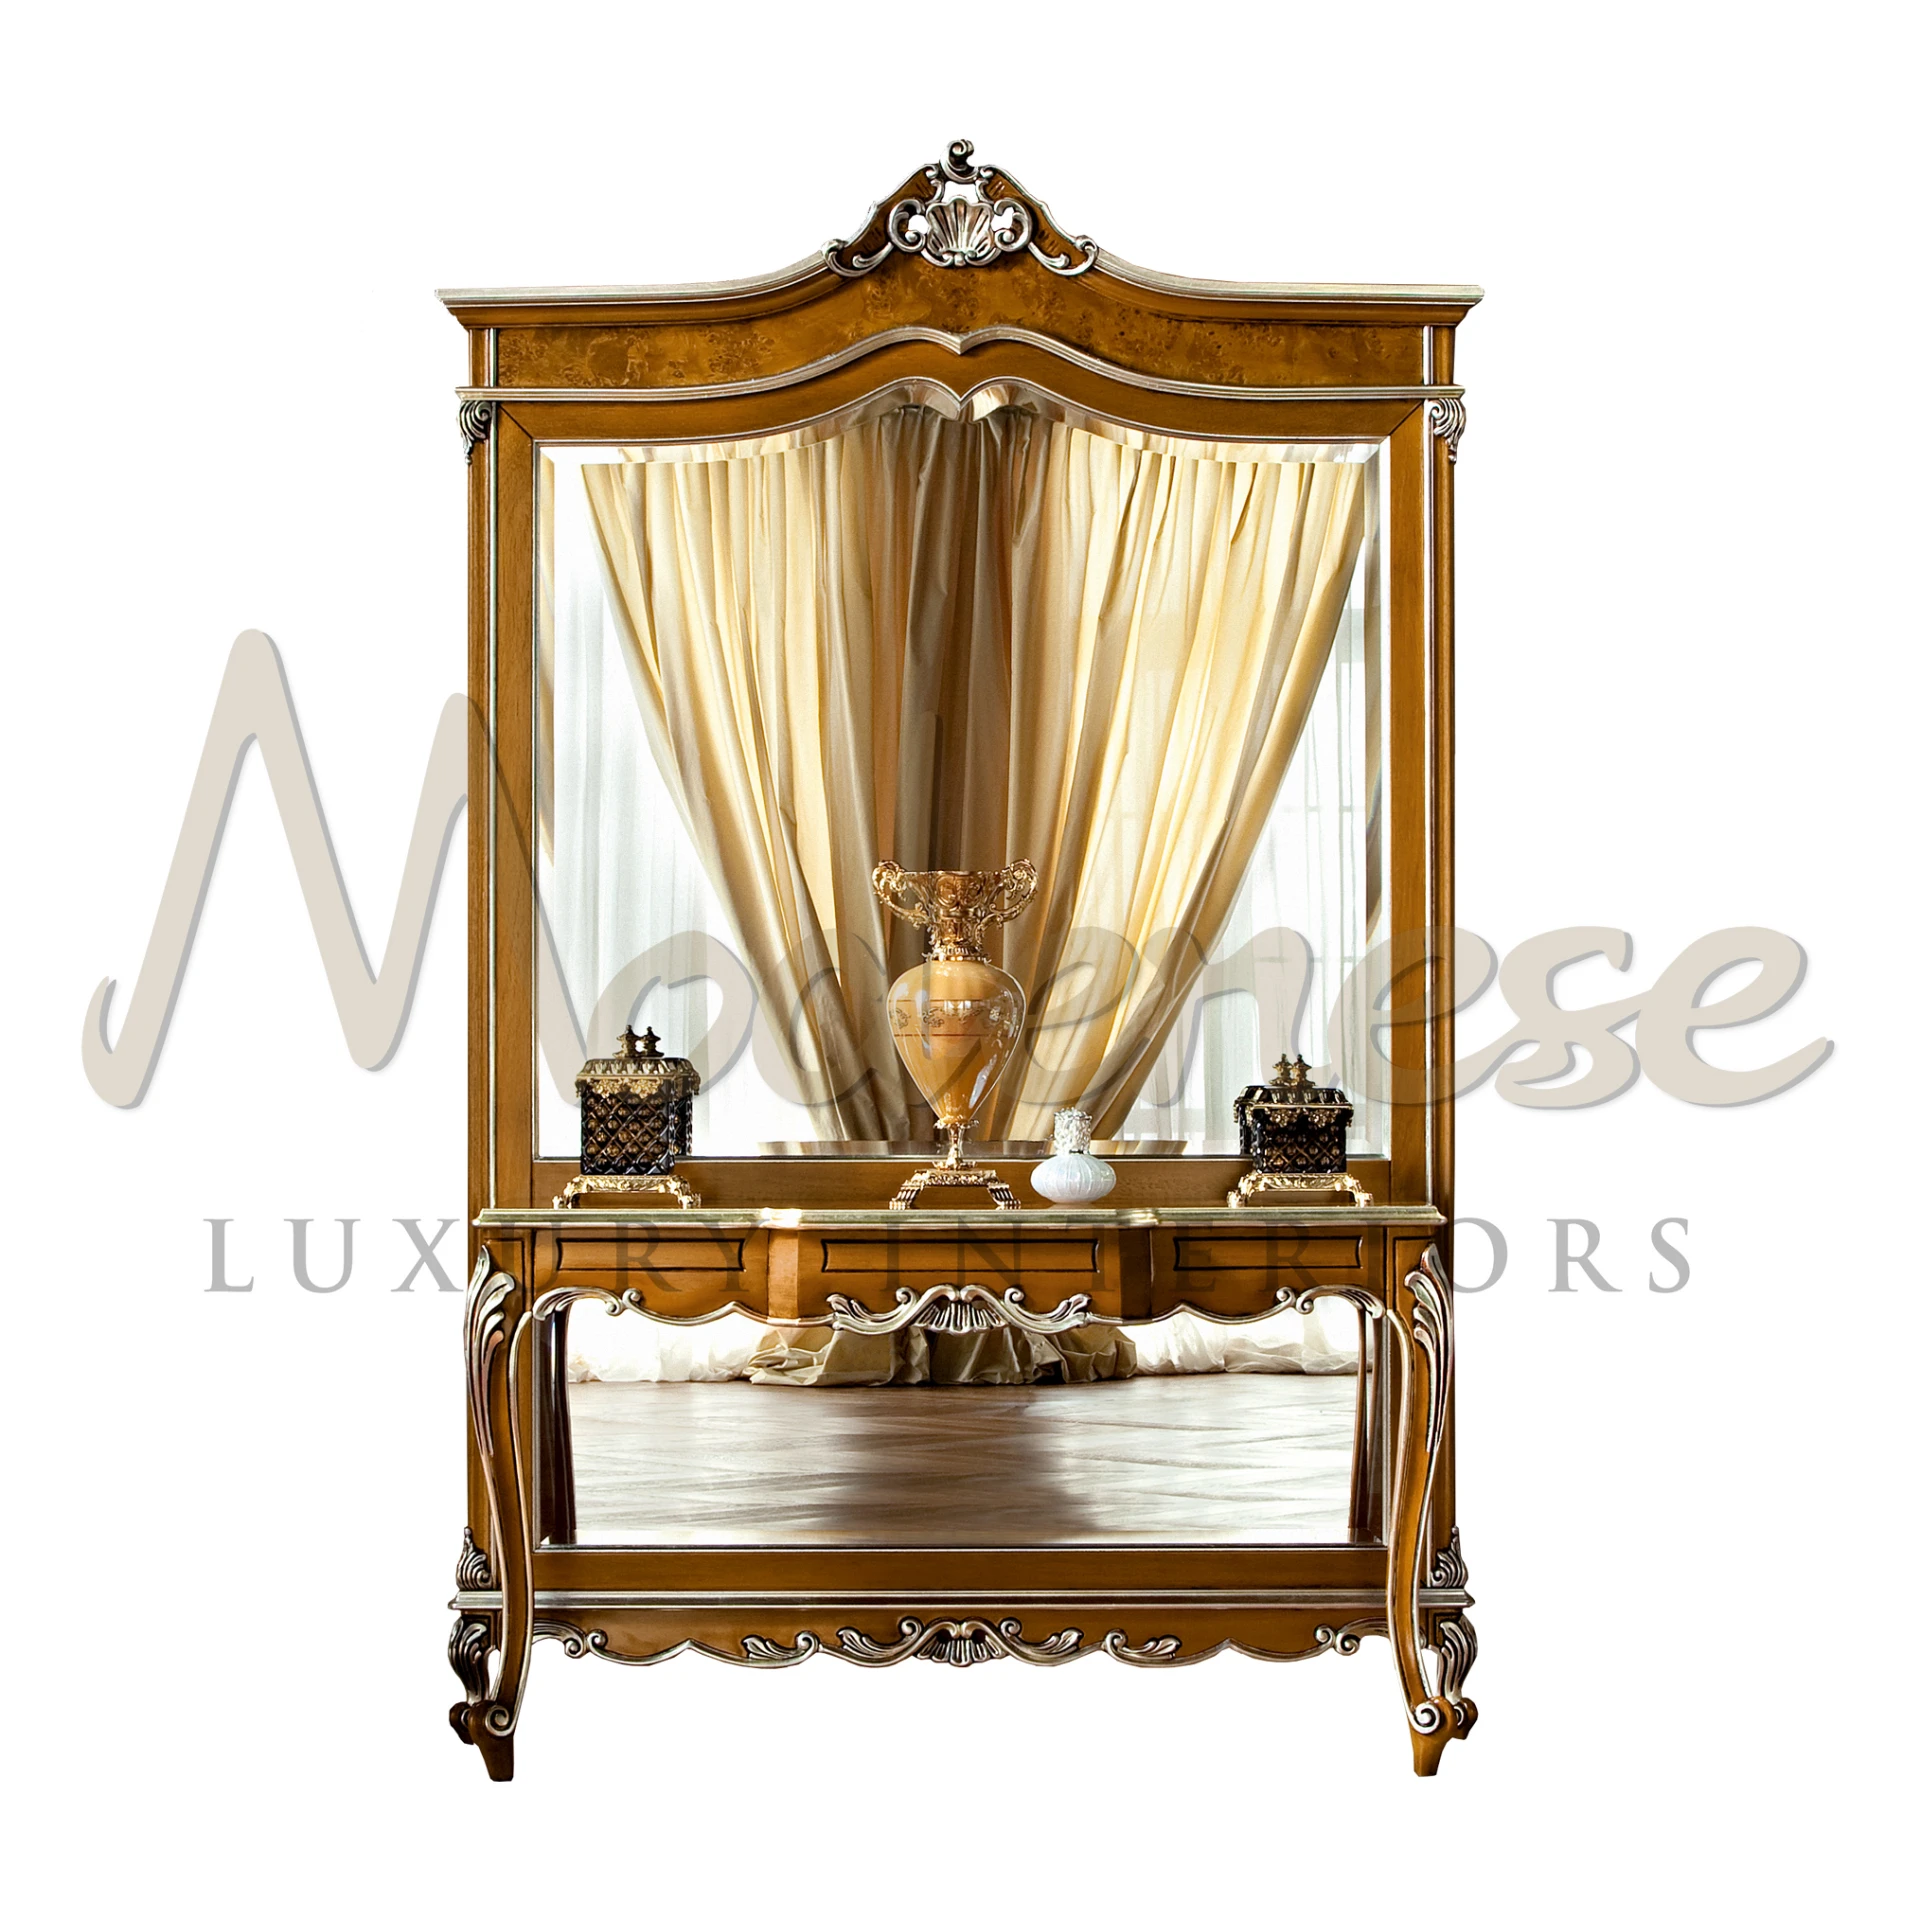 Luxurious Neoclassical Console: Silver Leaf Details for Timeless Charm